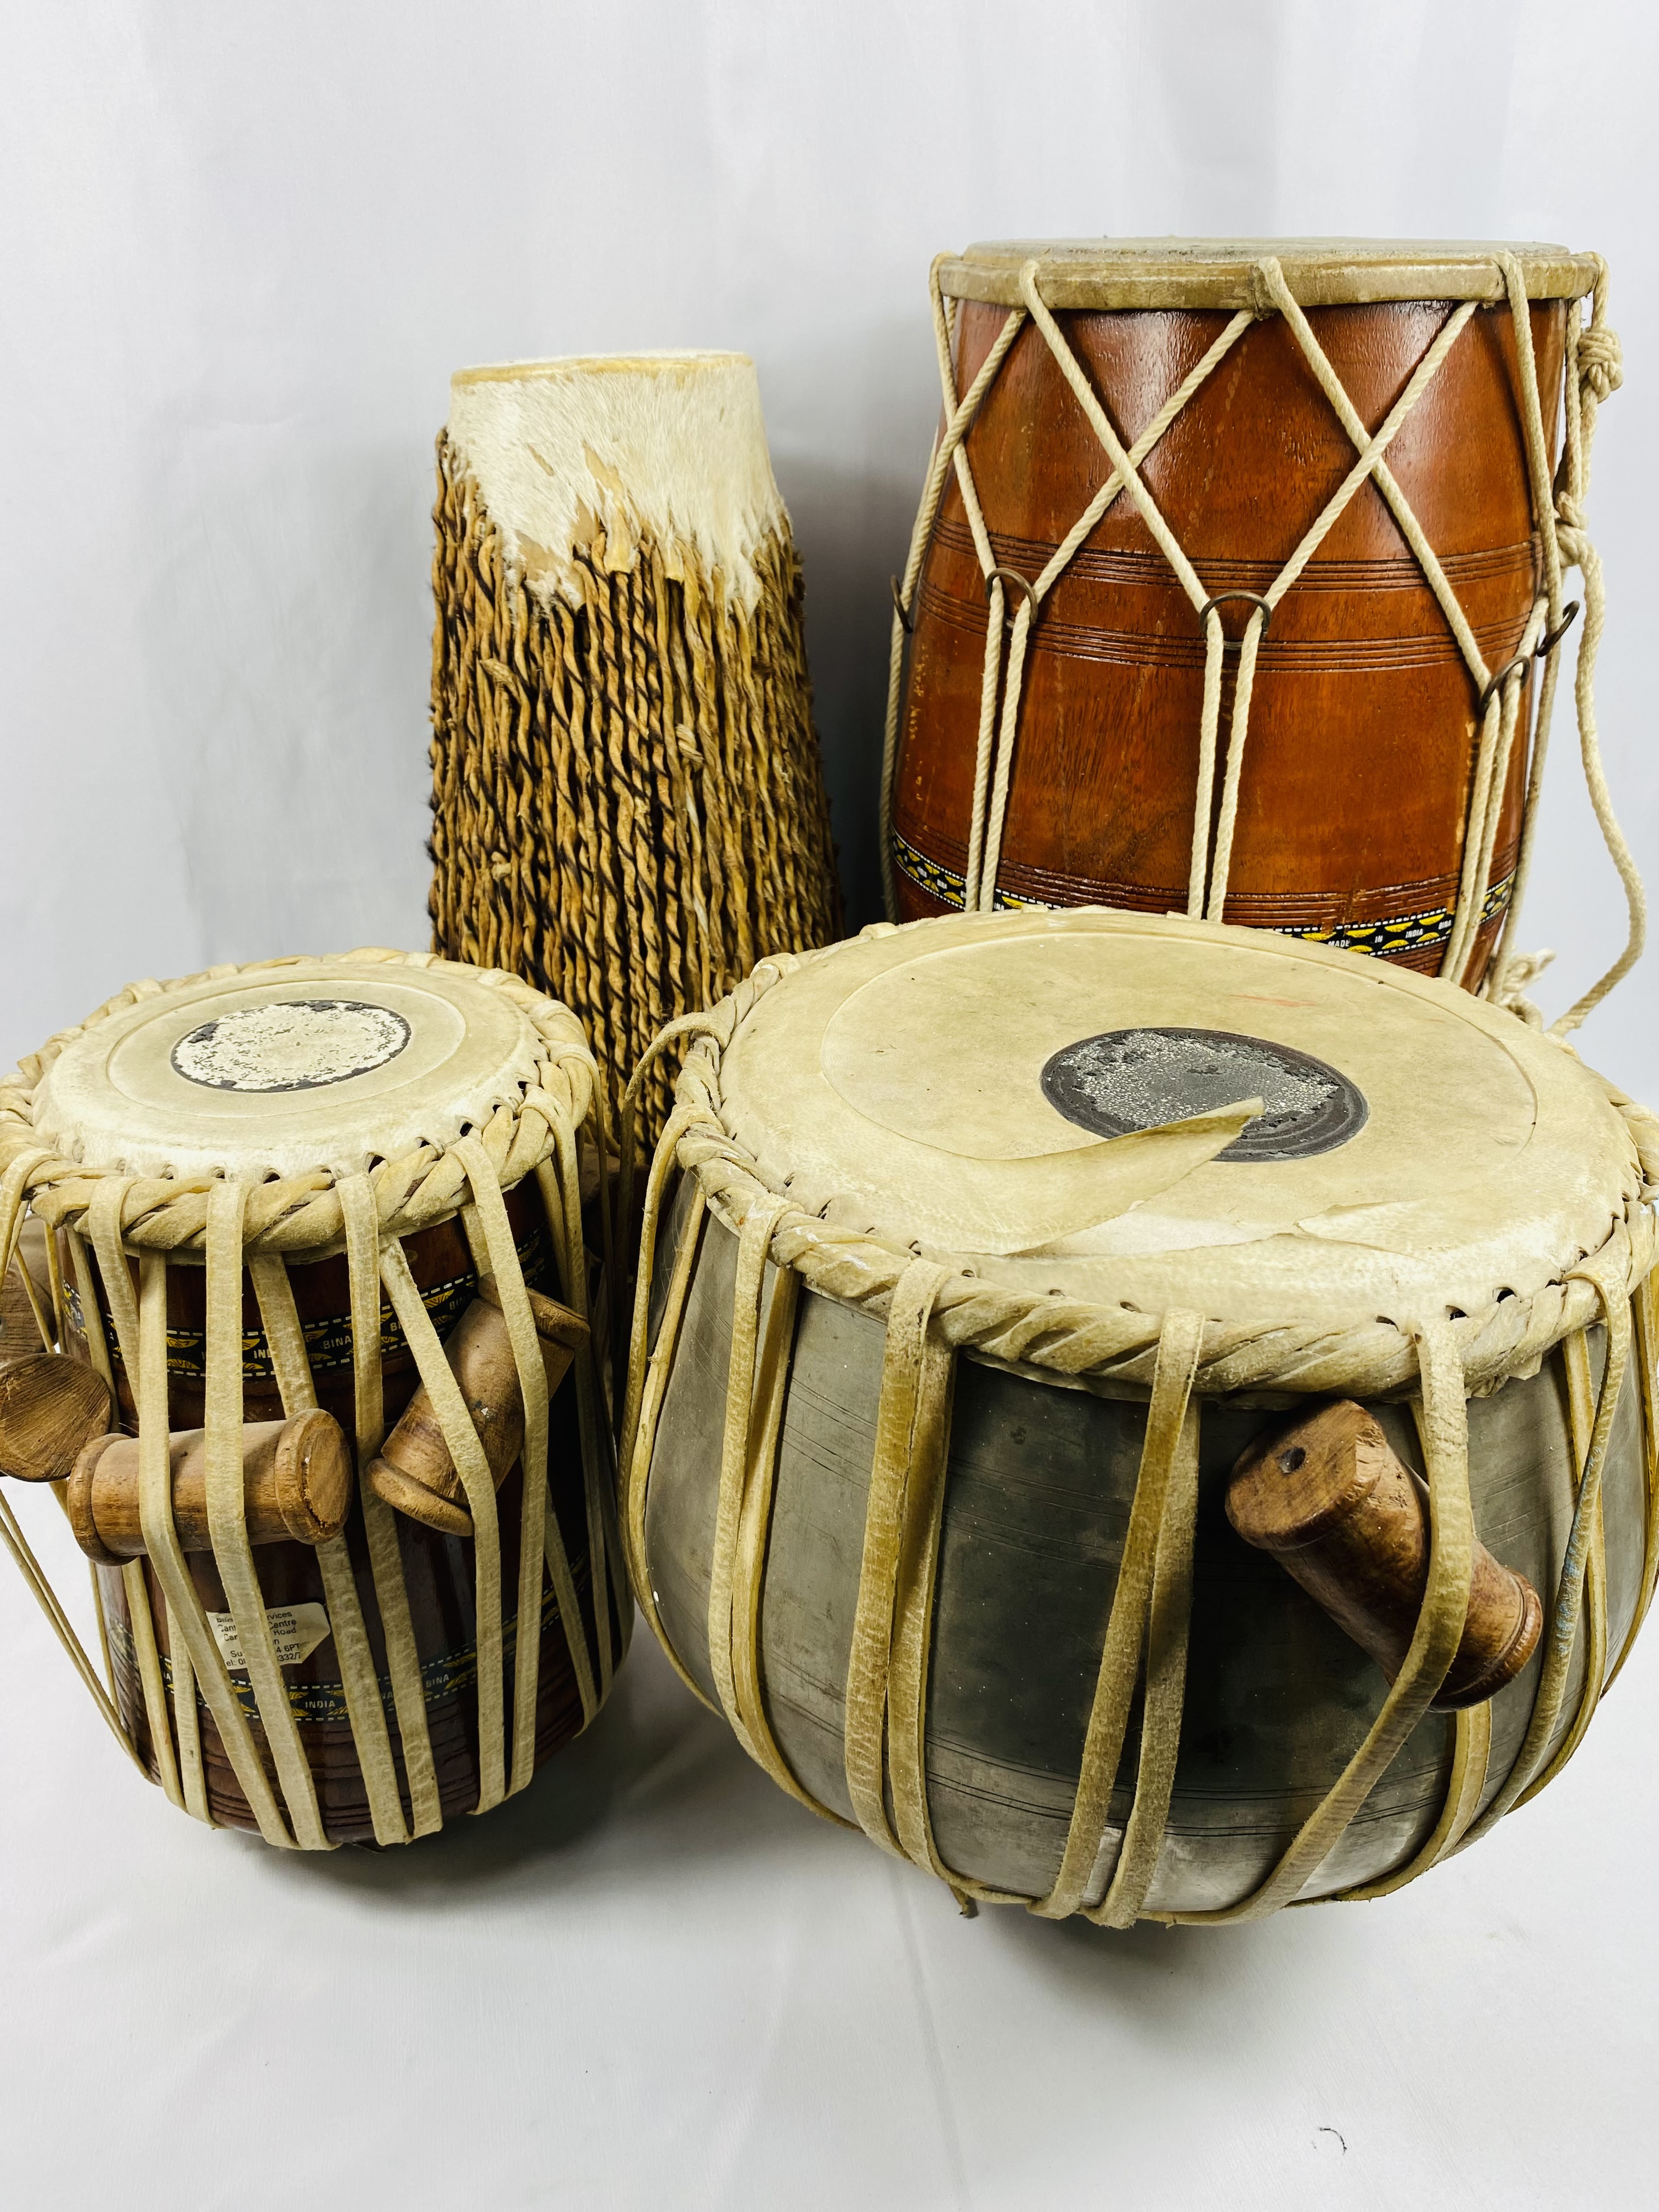 Four Indian drums